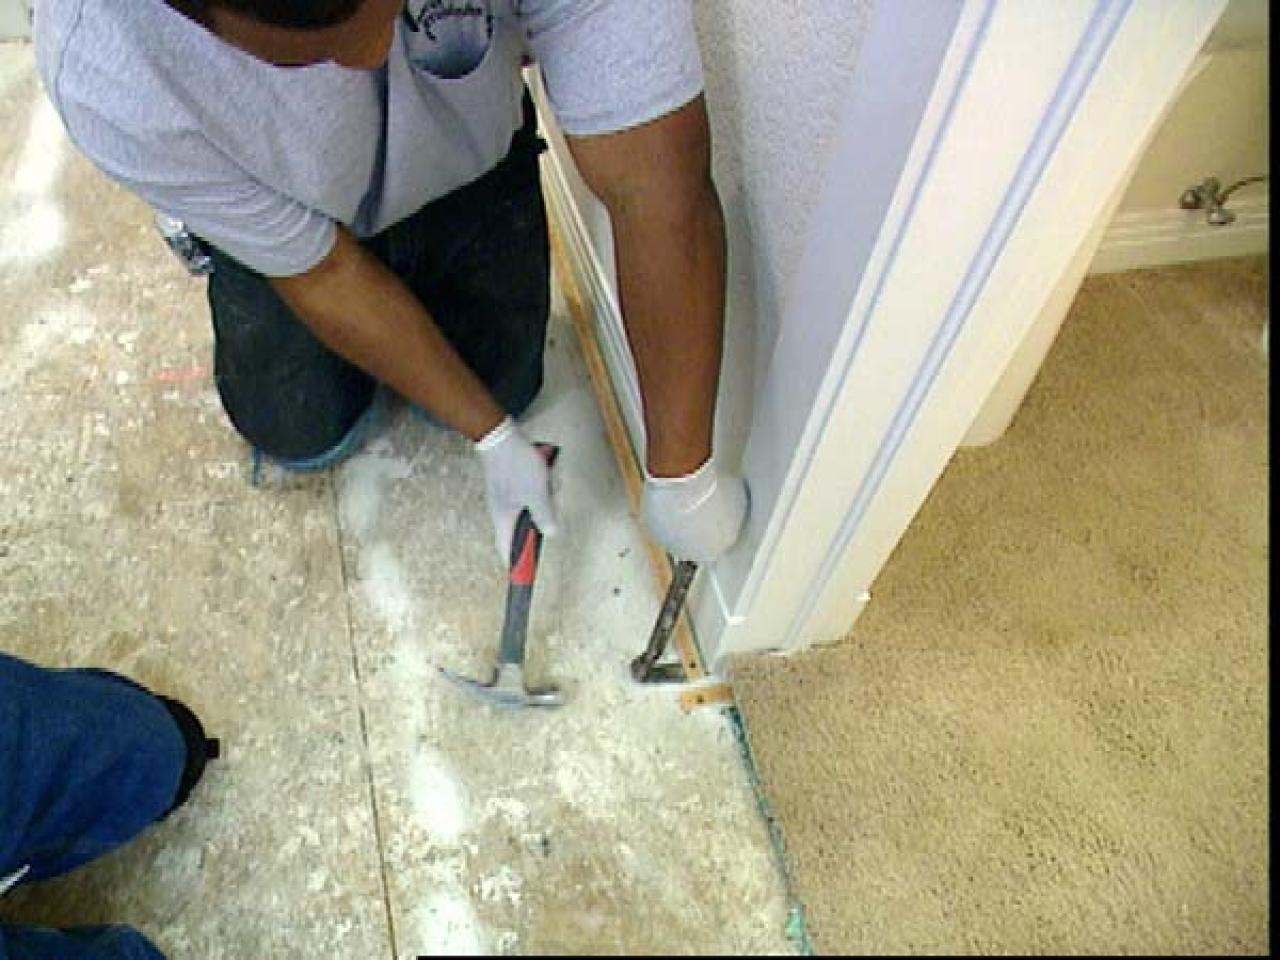 How To Install Tile Flooring Tos, How To Replace A Tile Floor